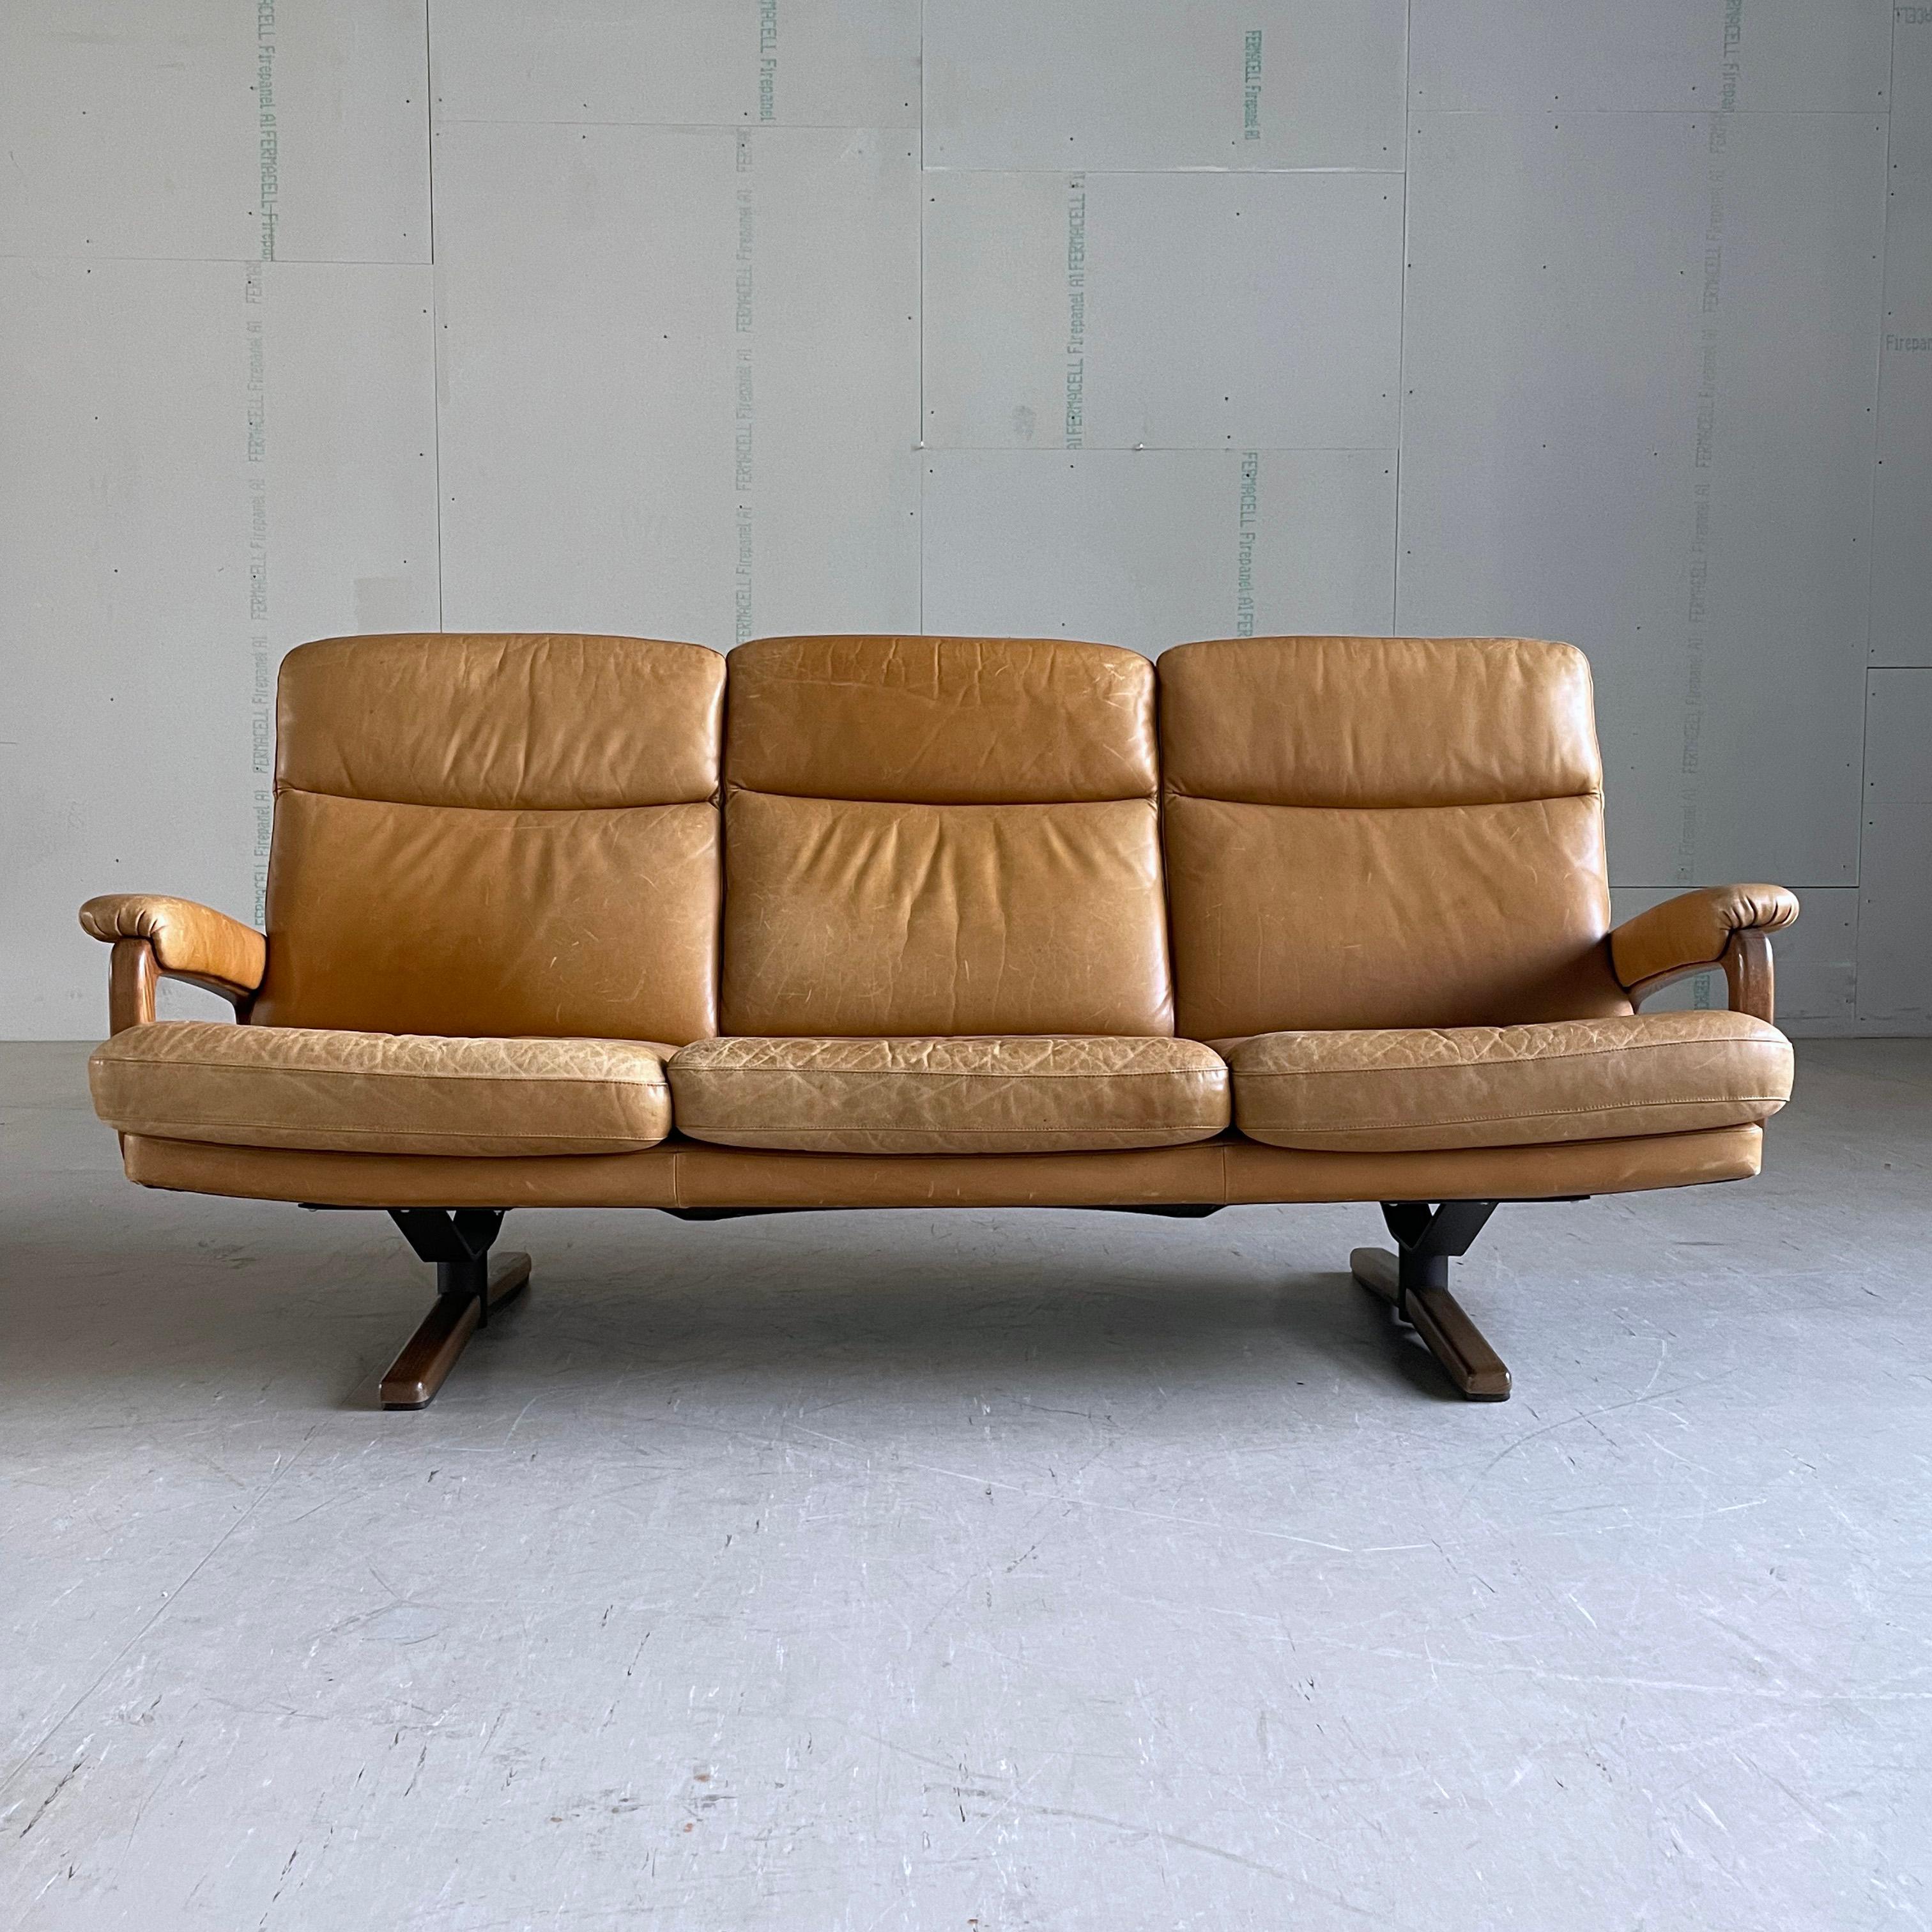 1960’s 3 seater sofa in high quality tanned leather. Designed by André Vandenbeuck and produced by Strässle, Switzerland. 
The leather is in very good general condition with normal signs of wear such as scuffs and light marks but overall nicely